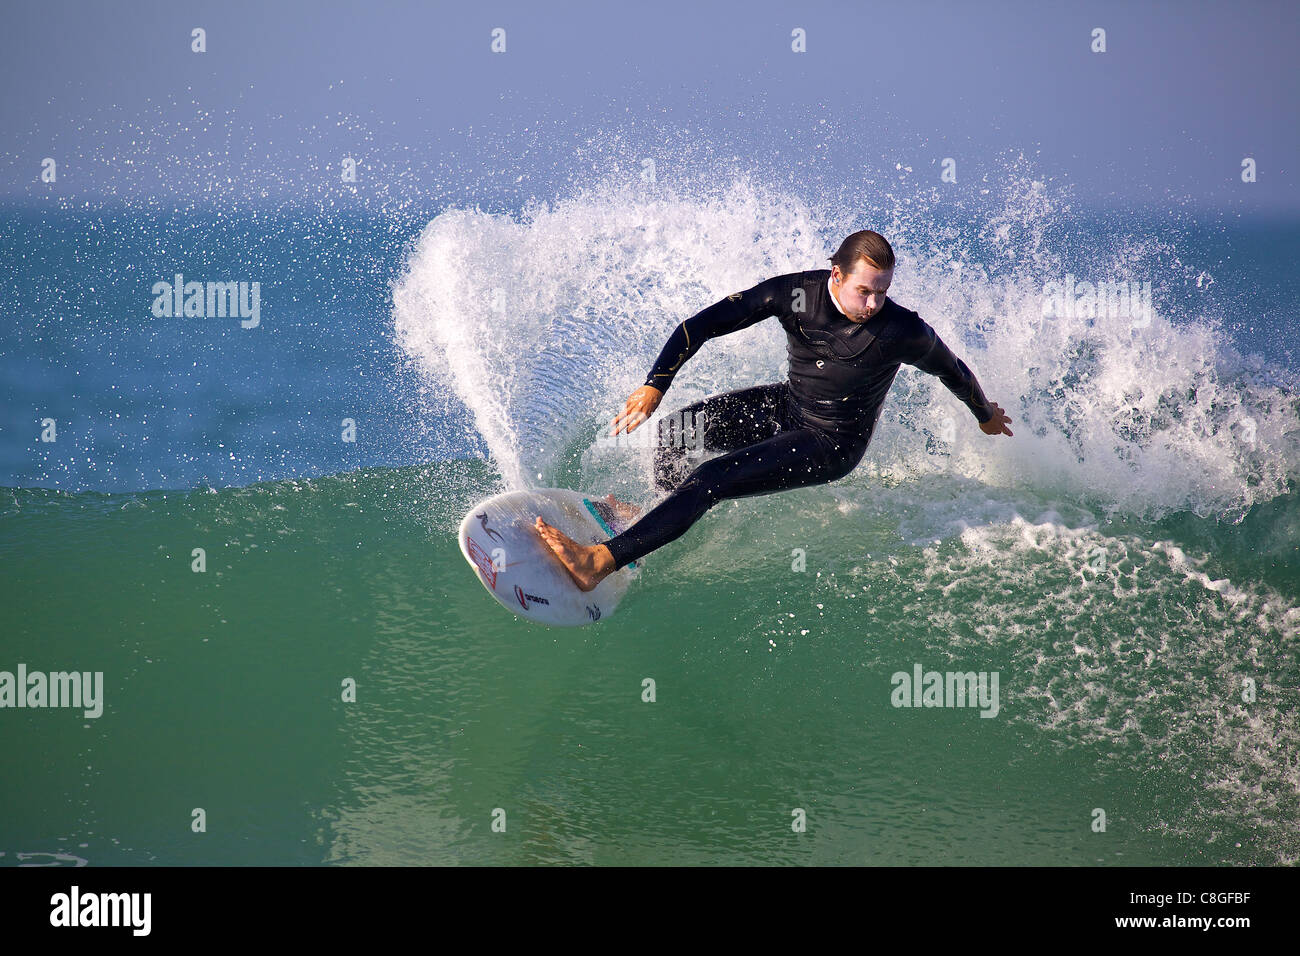 Top Turn Surf High Resolution Stock Photography and Images - Alamy